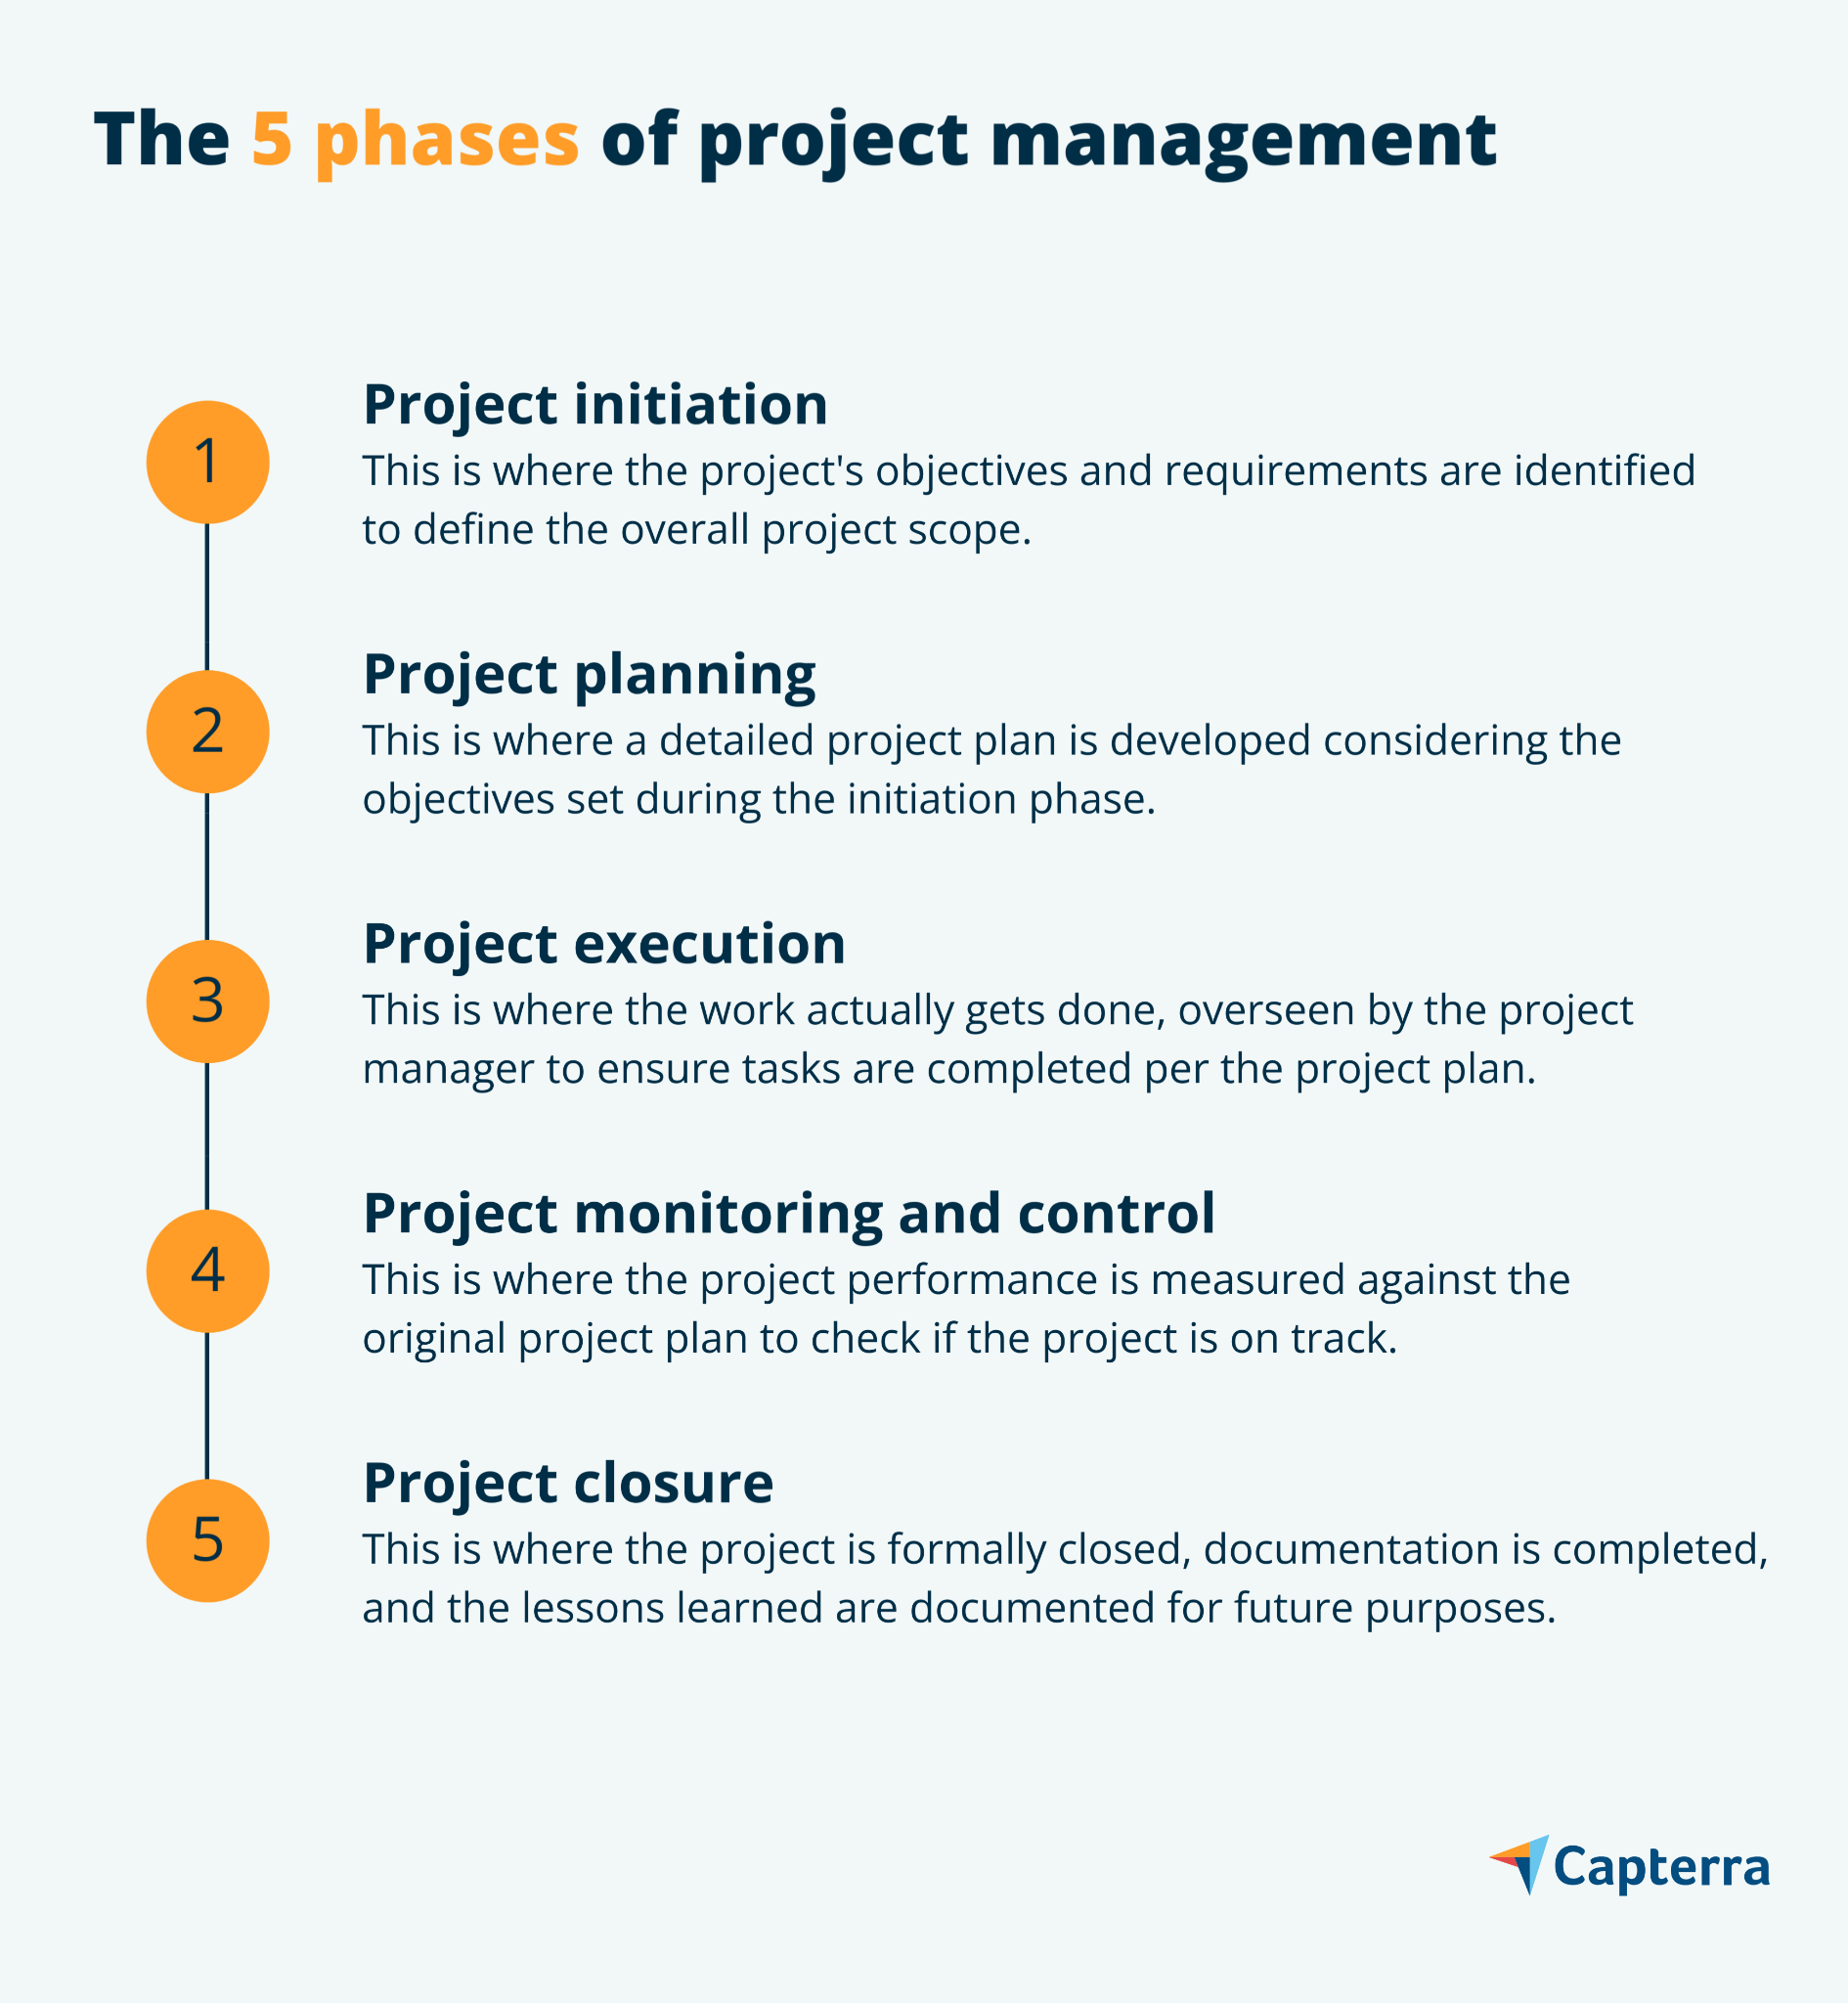 A Breakdown of the 5 Phases of Project Management | Capterra